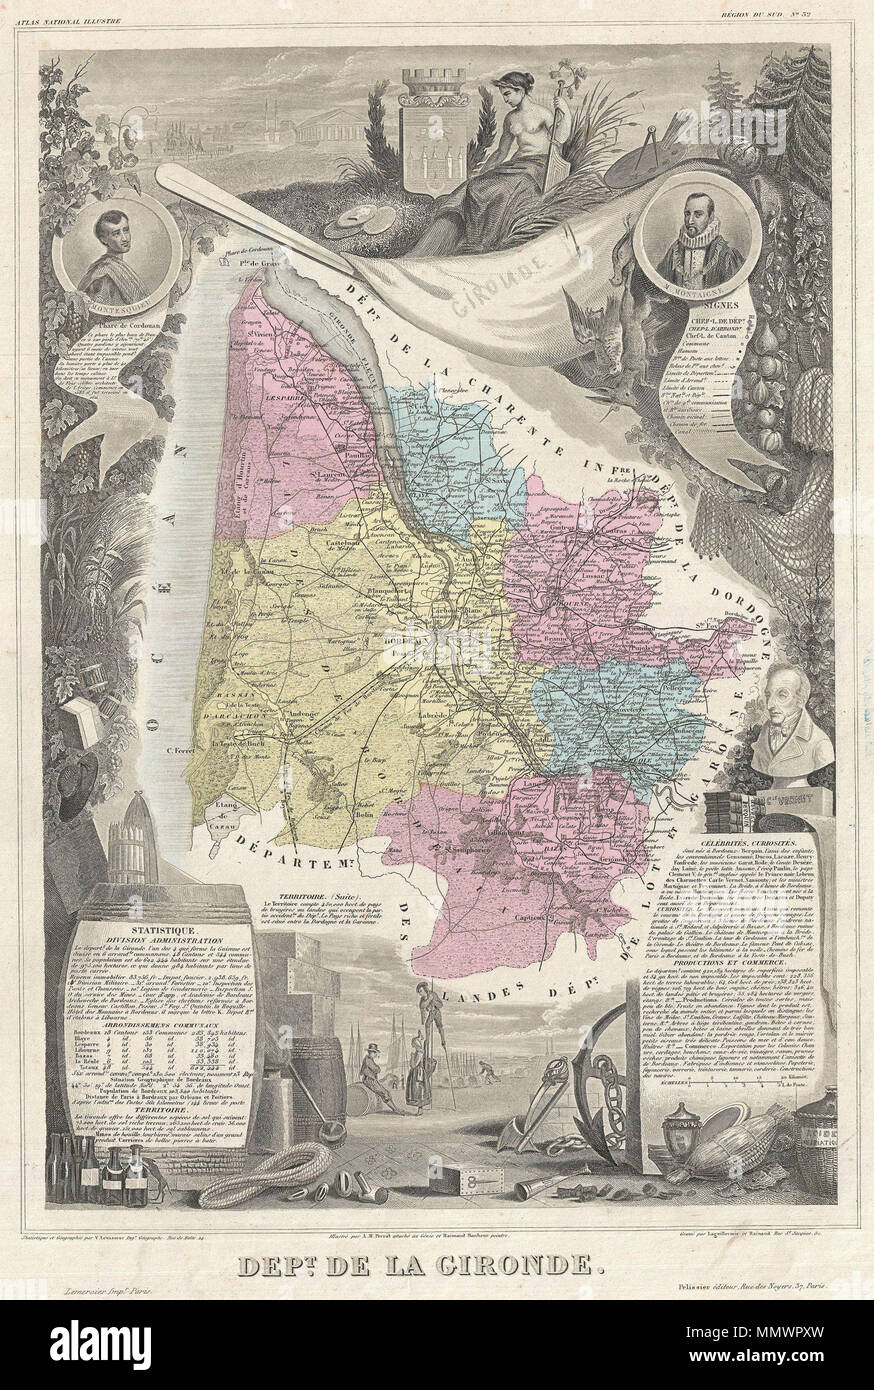 .  English: This is a fascinating 1861 map of the French department of Gironde. This coastal department is the seat of the Bordeaux wine region and produces many of the world's finest reds. Shows numerous vineyards and chateaux. The whole is surrounded by elaborate decorative engravings designed to illustrate both the natural beauty and trade richness of the land. There is a short textual history of the regions depicted on both the left and right sides of the map. Published by V. Levasseur in the 1861 edition of his Atlas National de la France Illustree.  Dept. de la Gironde.. 1861 (undated).  Stock Photo